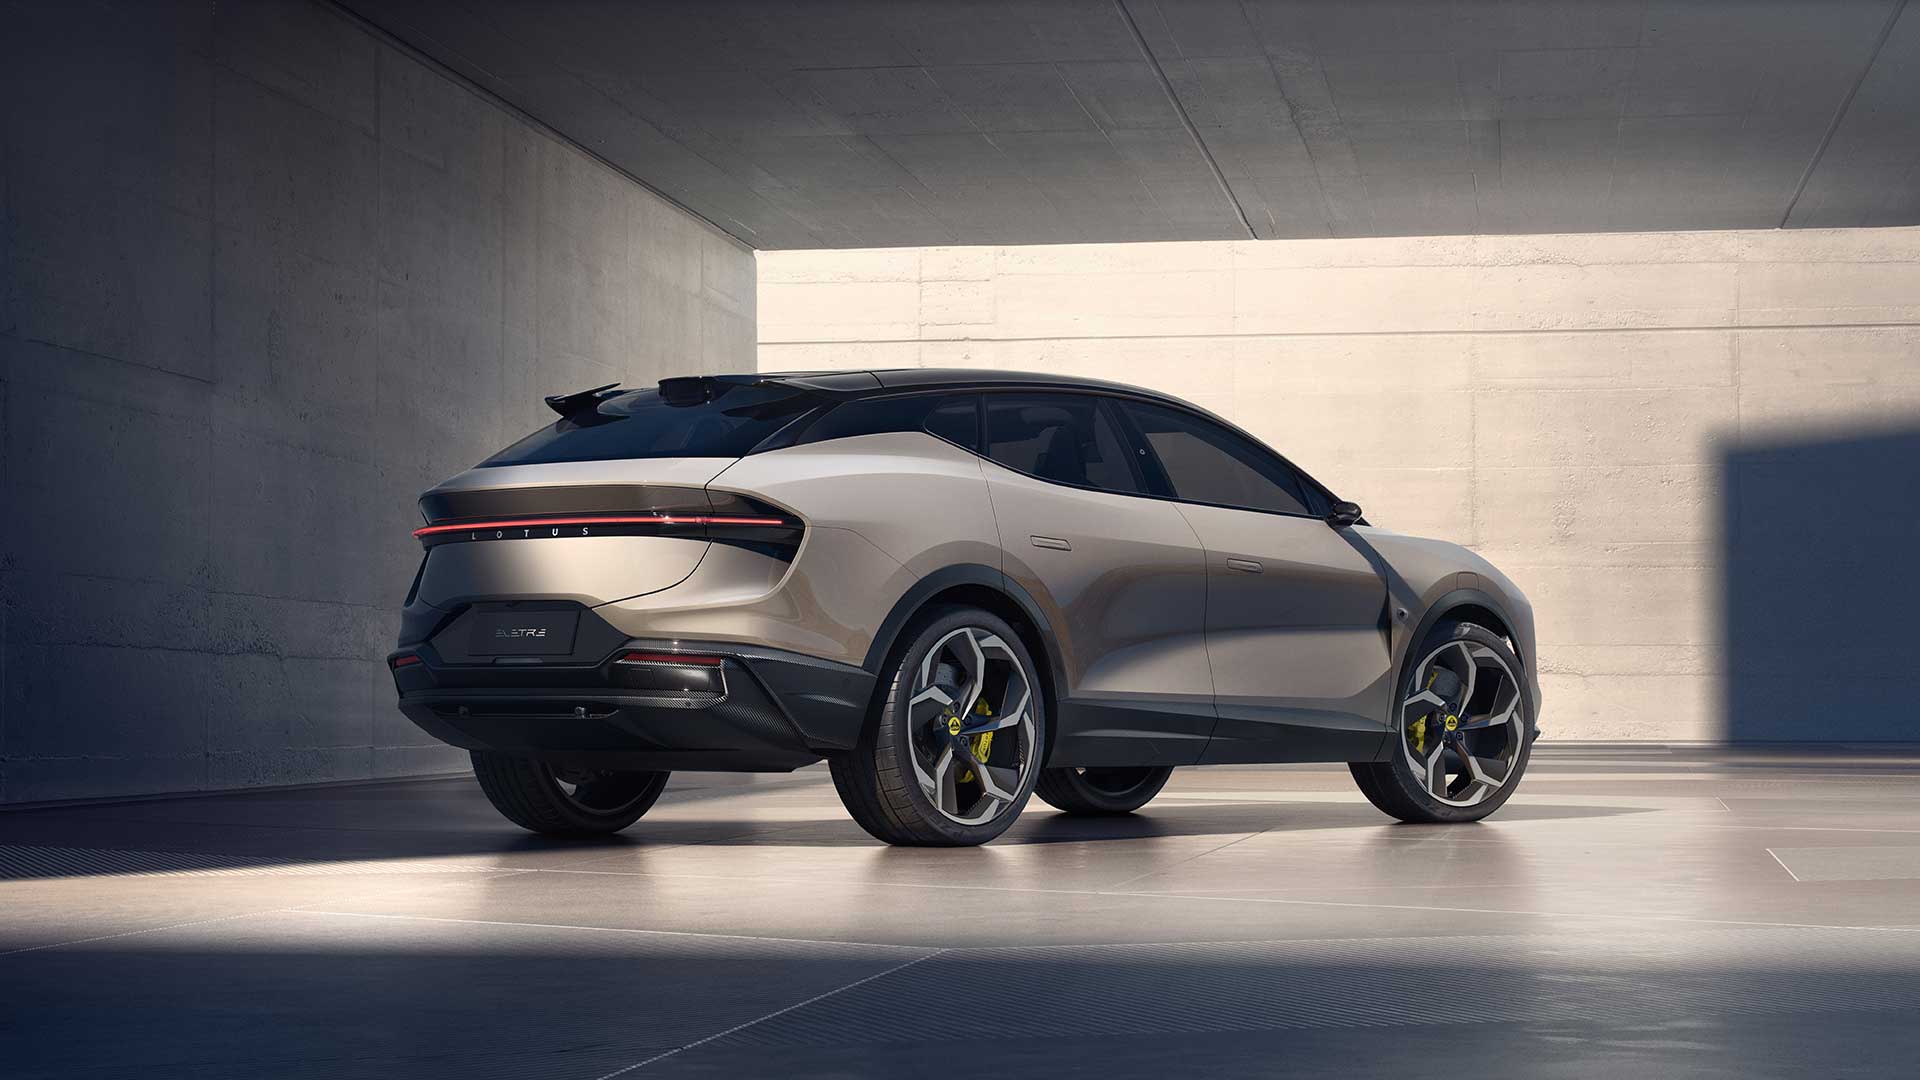 The all-electric Hyper-SUV